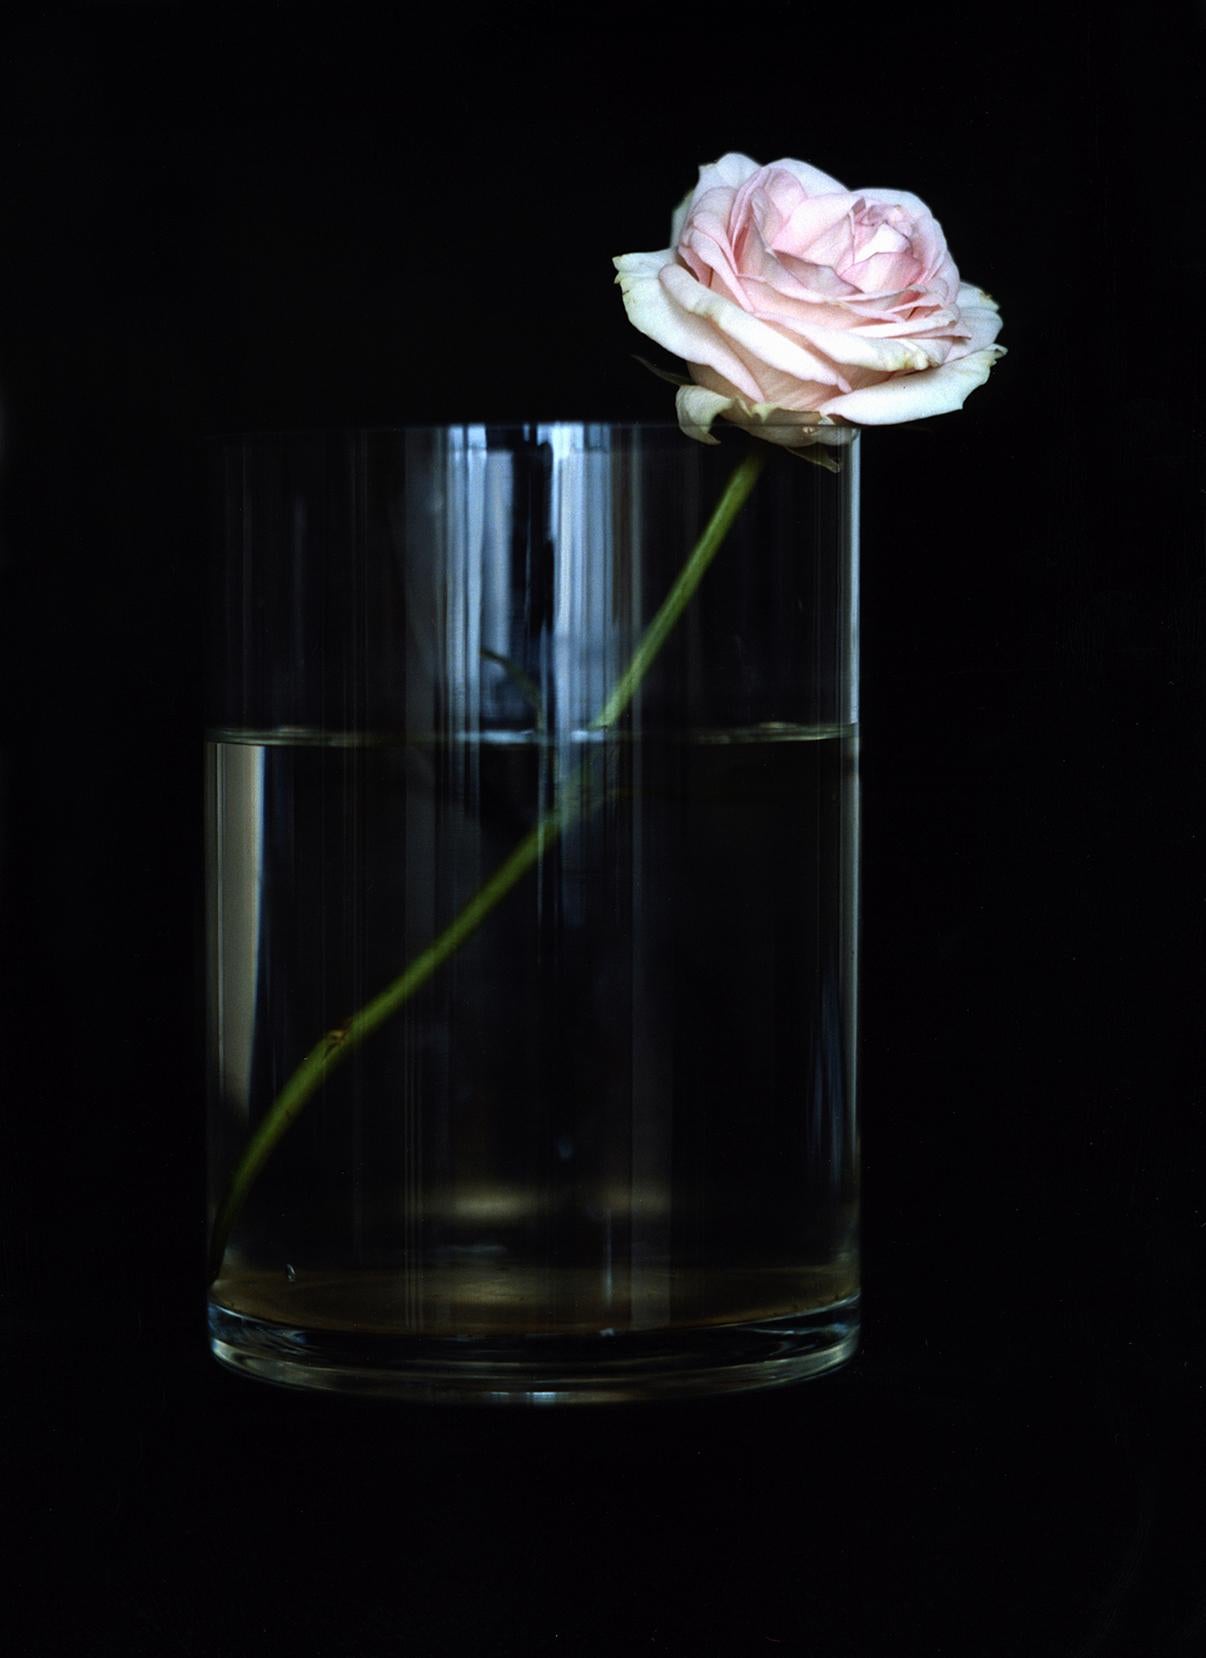 Michael James O’Brien Color Photograph - One Pink Rose, n.d. Still life limited edition color photograph